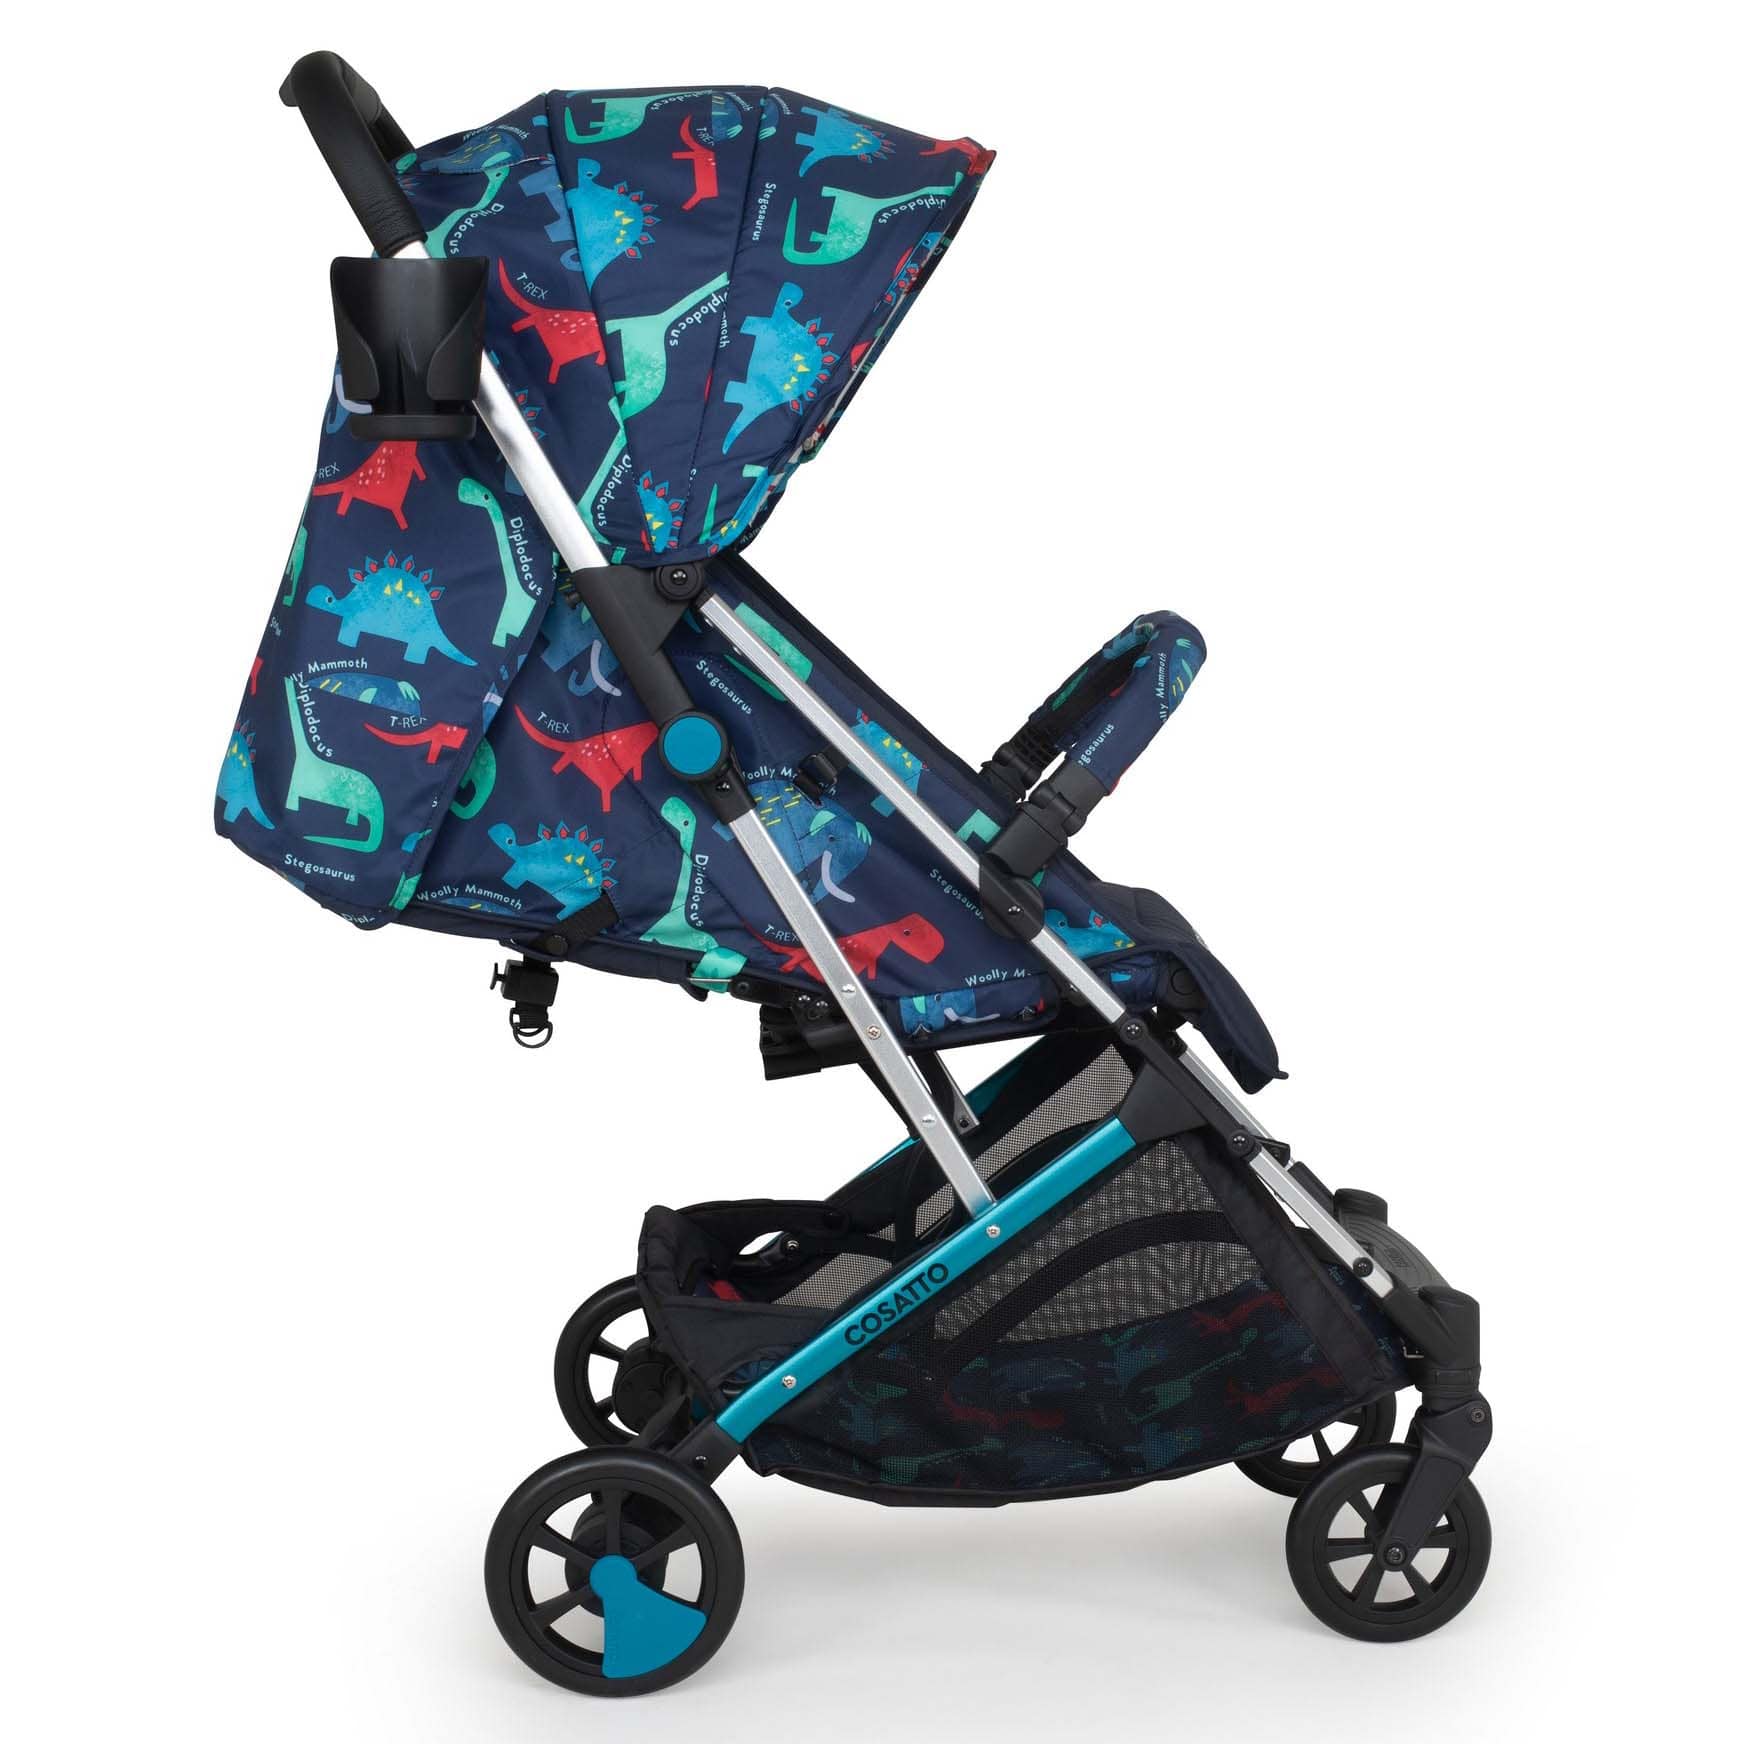 Cosatto baby pushchairs Cosatto Woosh 3 Stroller D is for Dino CT5055